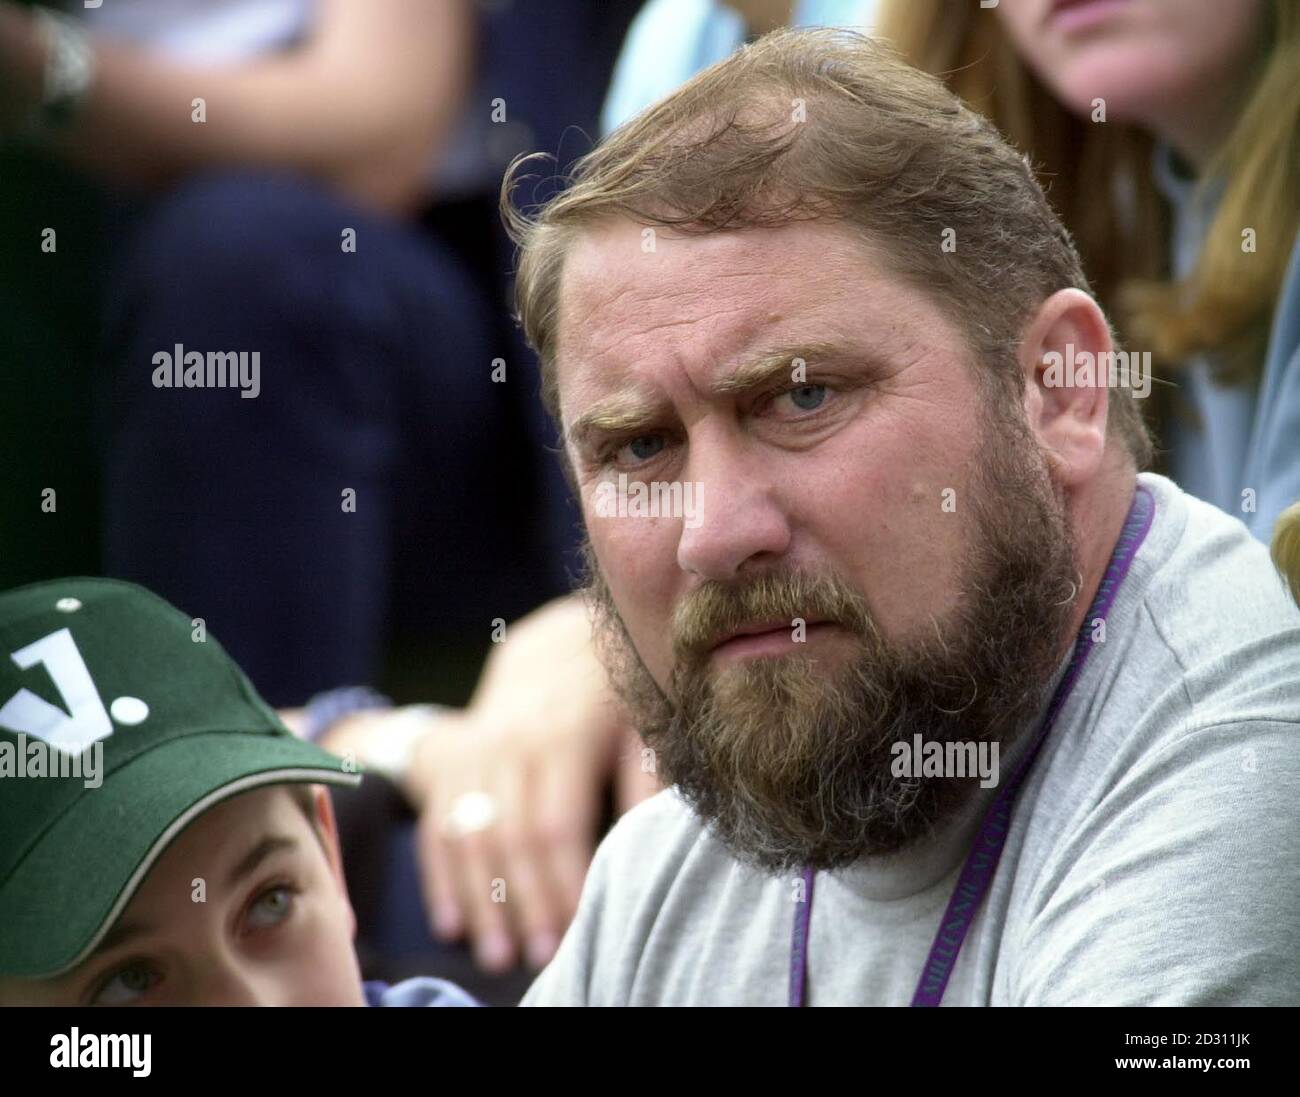 NO COMMERCIAL USE: Damir Dokic father of Australia's Jelena Dokic watches her in action against Kristina  Brandi of America at Wimbledon. Stock Photo